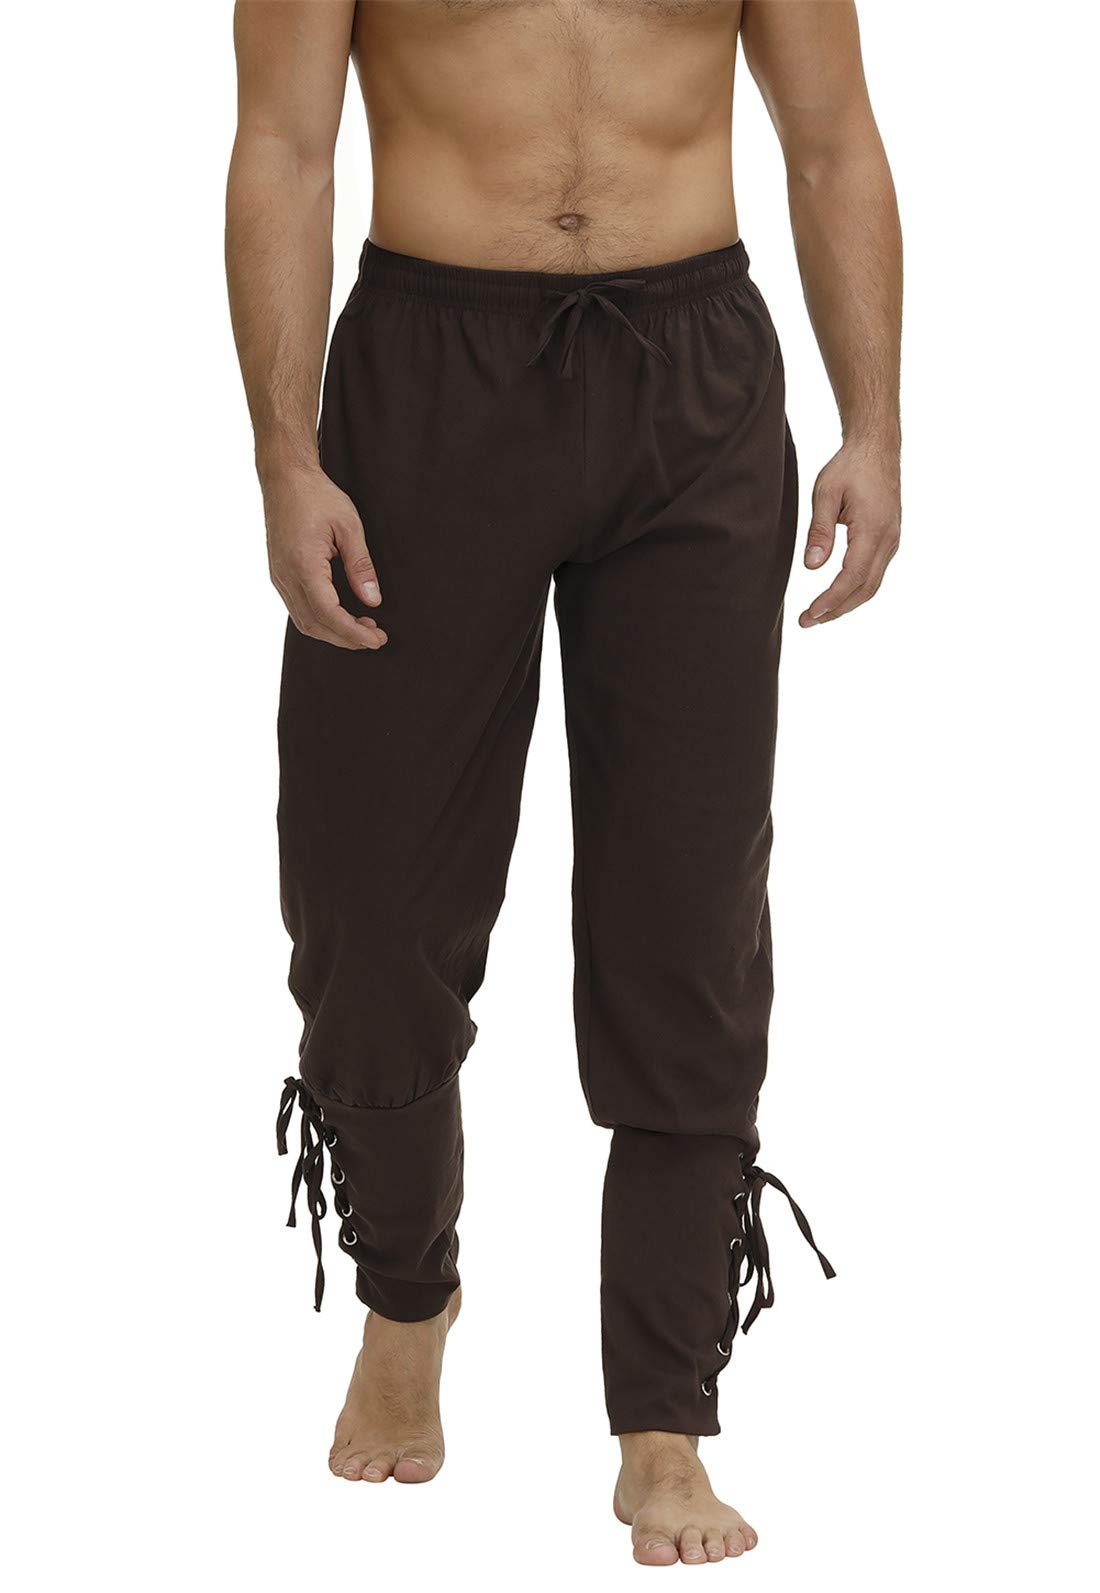 Men's Ankle Banded Cuff Renaissance Pants Medieval Viking Navigator Trousers Pirate Cosplay Costume with Drawstrings Medium Brown